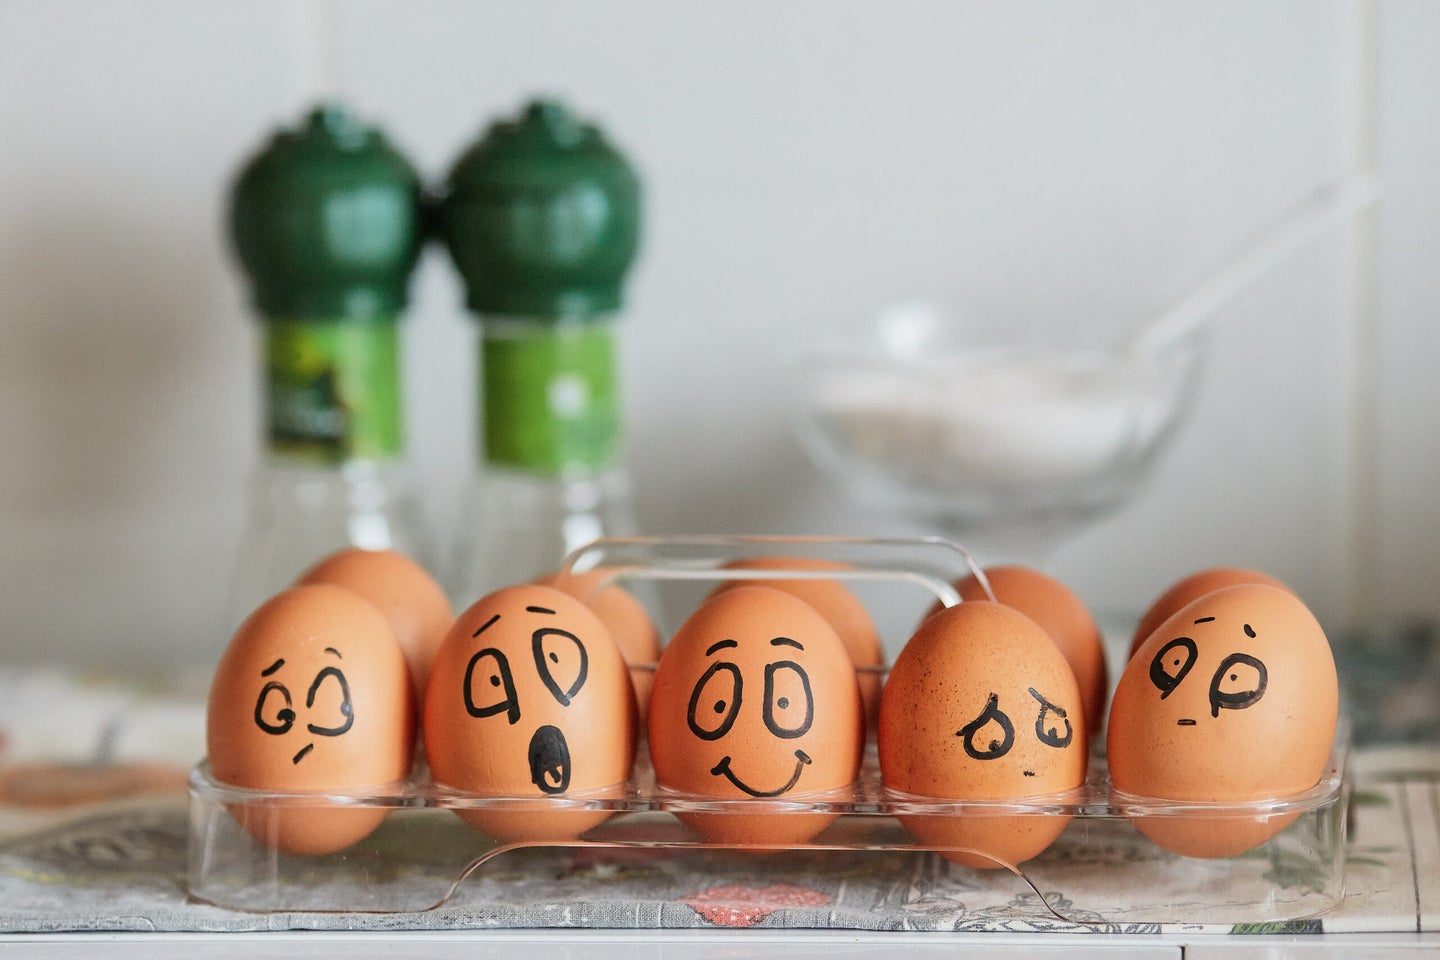 A carton of brown eggs with faces drawn on